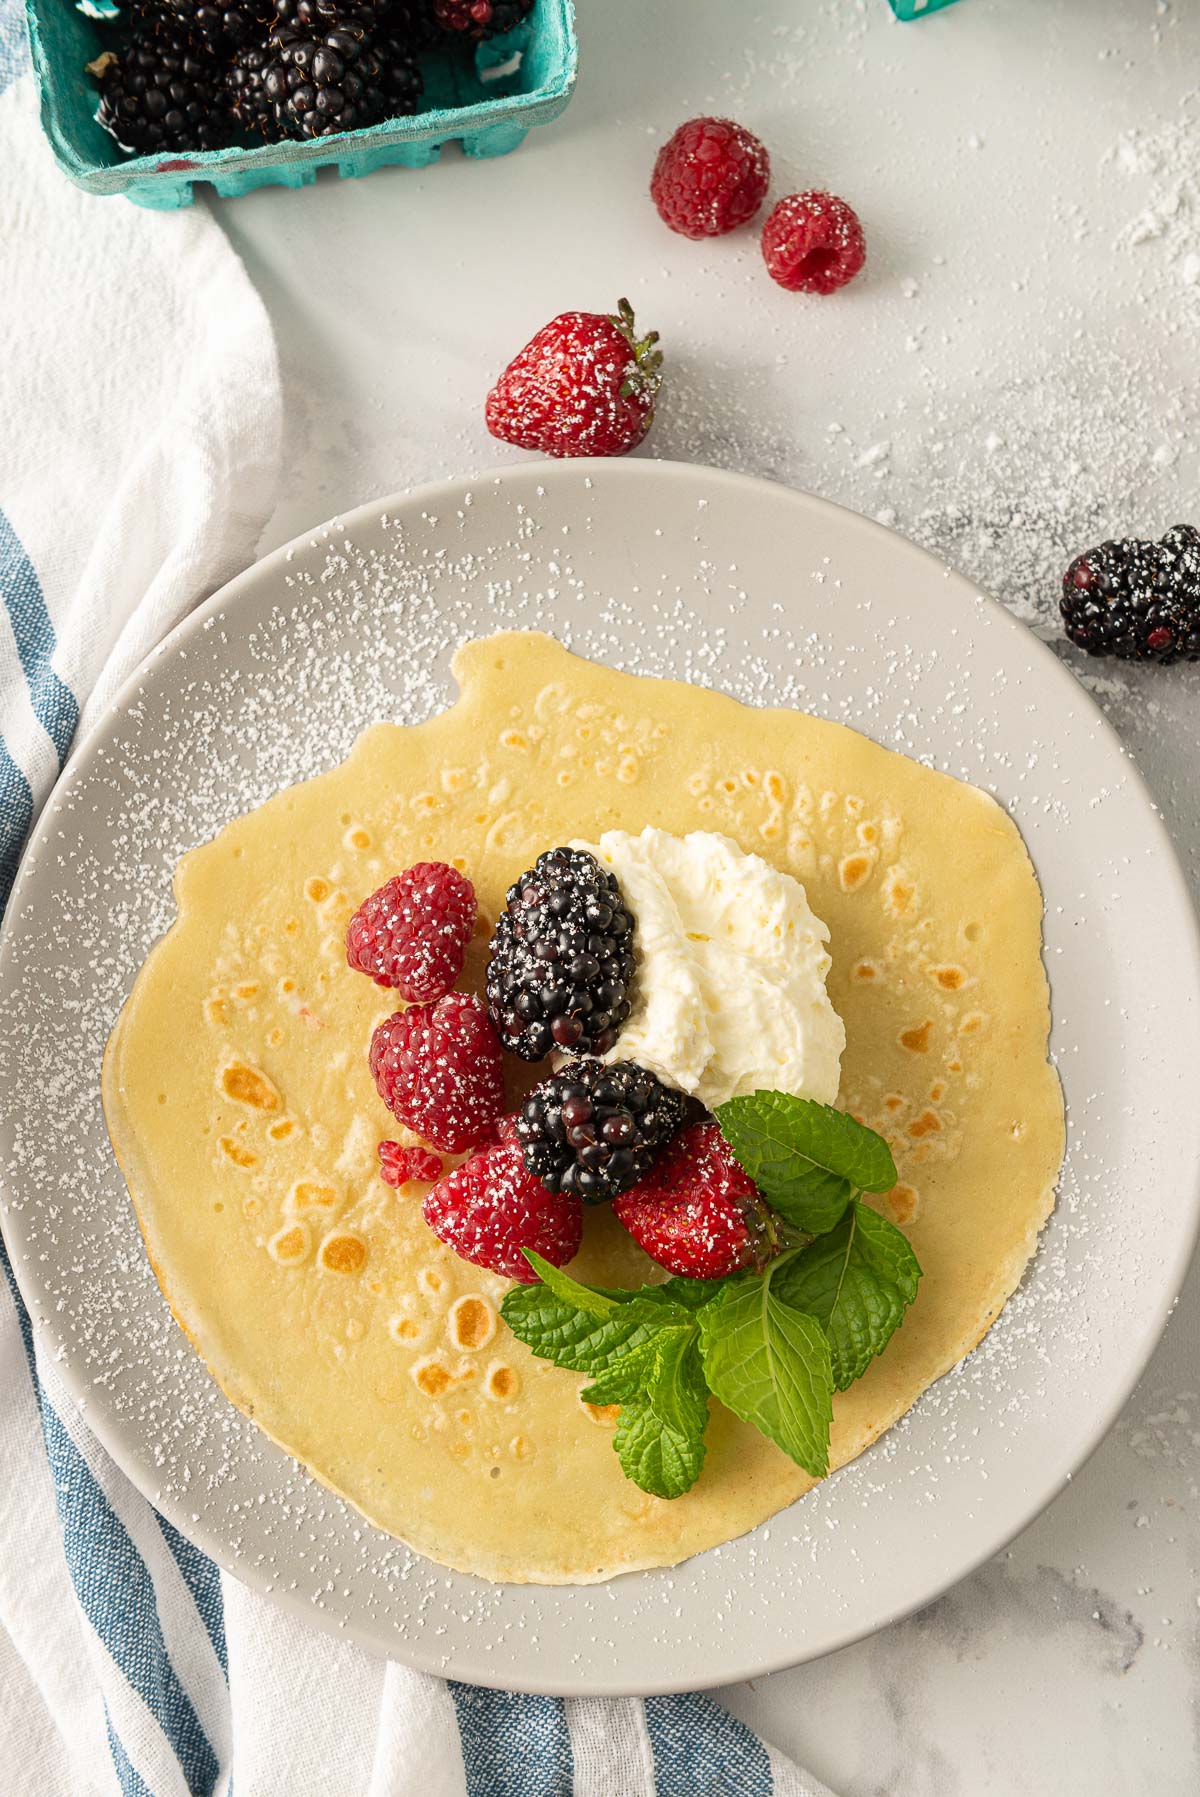 An unfolded crepe that's been filled with raspberries, blackberries, whipped cream, and a sprinkle of icing sugar.